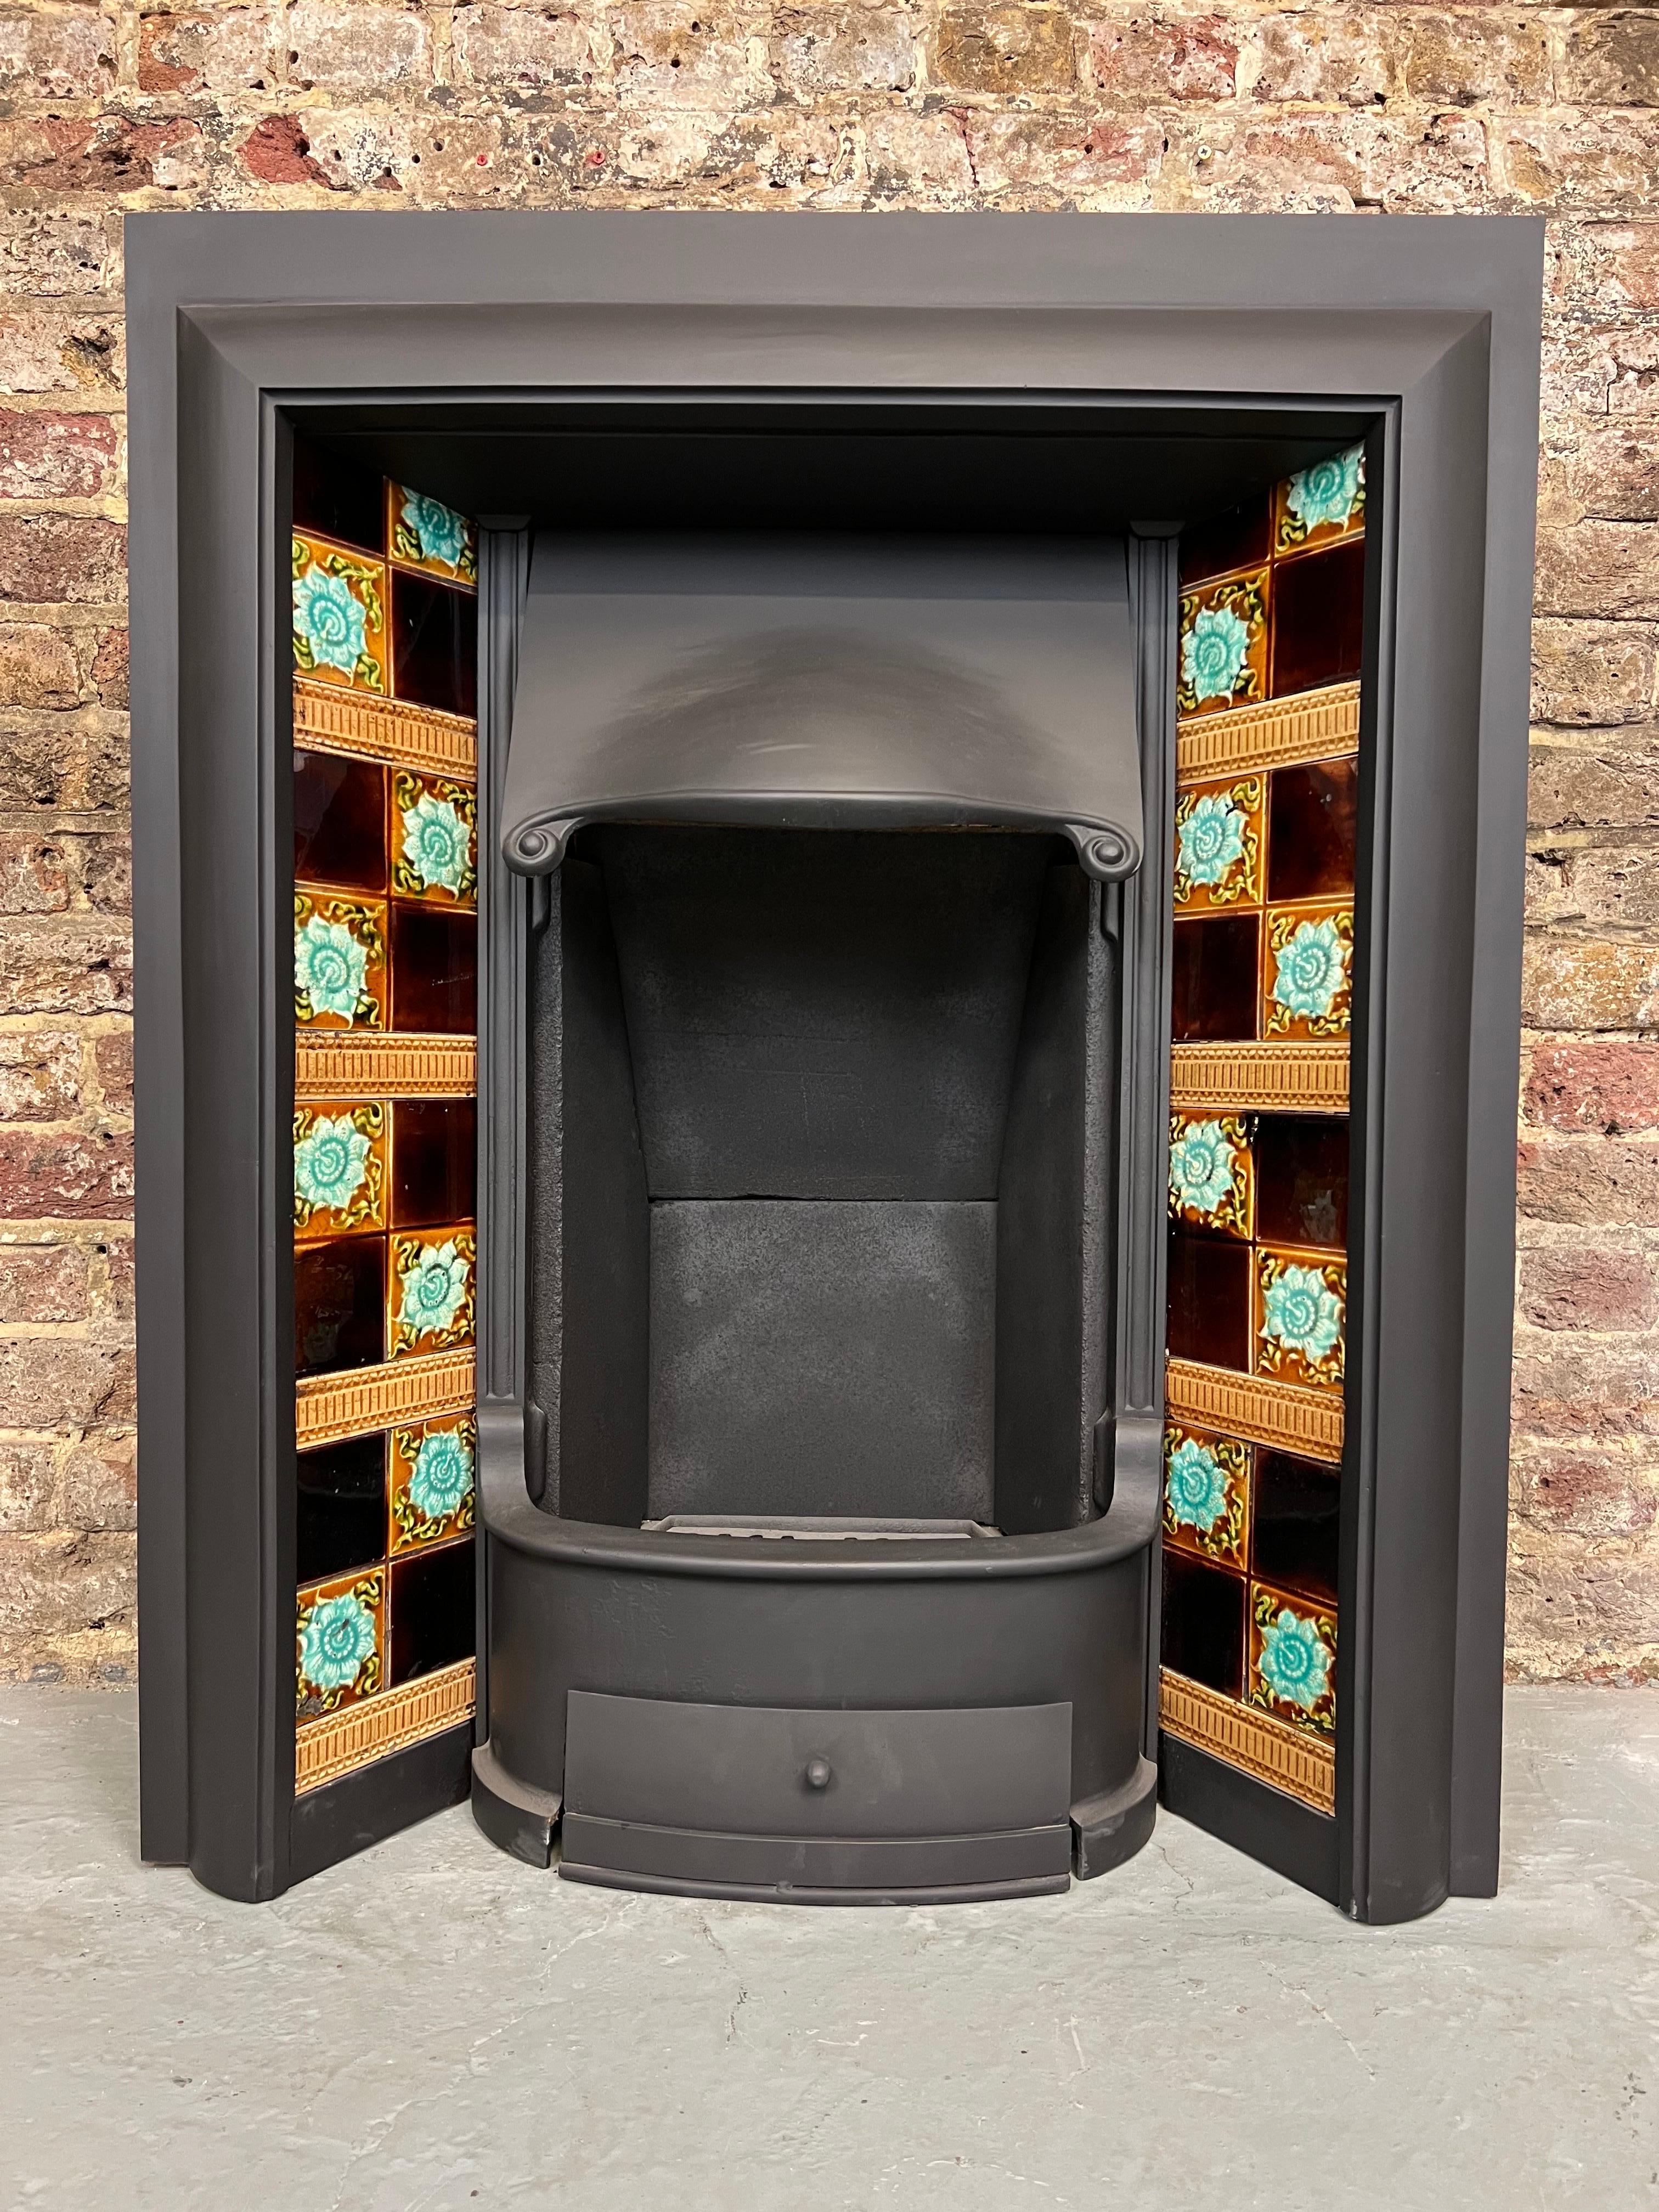 19th Century tiled cast iron fireplace insert.
With adjustable canopy hood, removable front bars, bottom grate & ash pan
including a very unique set of original hand painted victorian glazed ceramic tiles.
this fireplace insert is in traditional